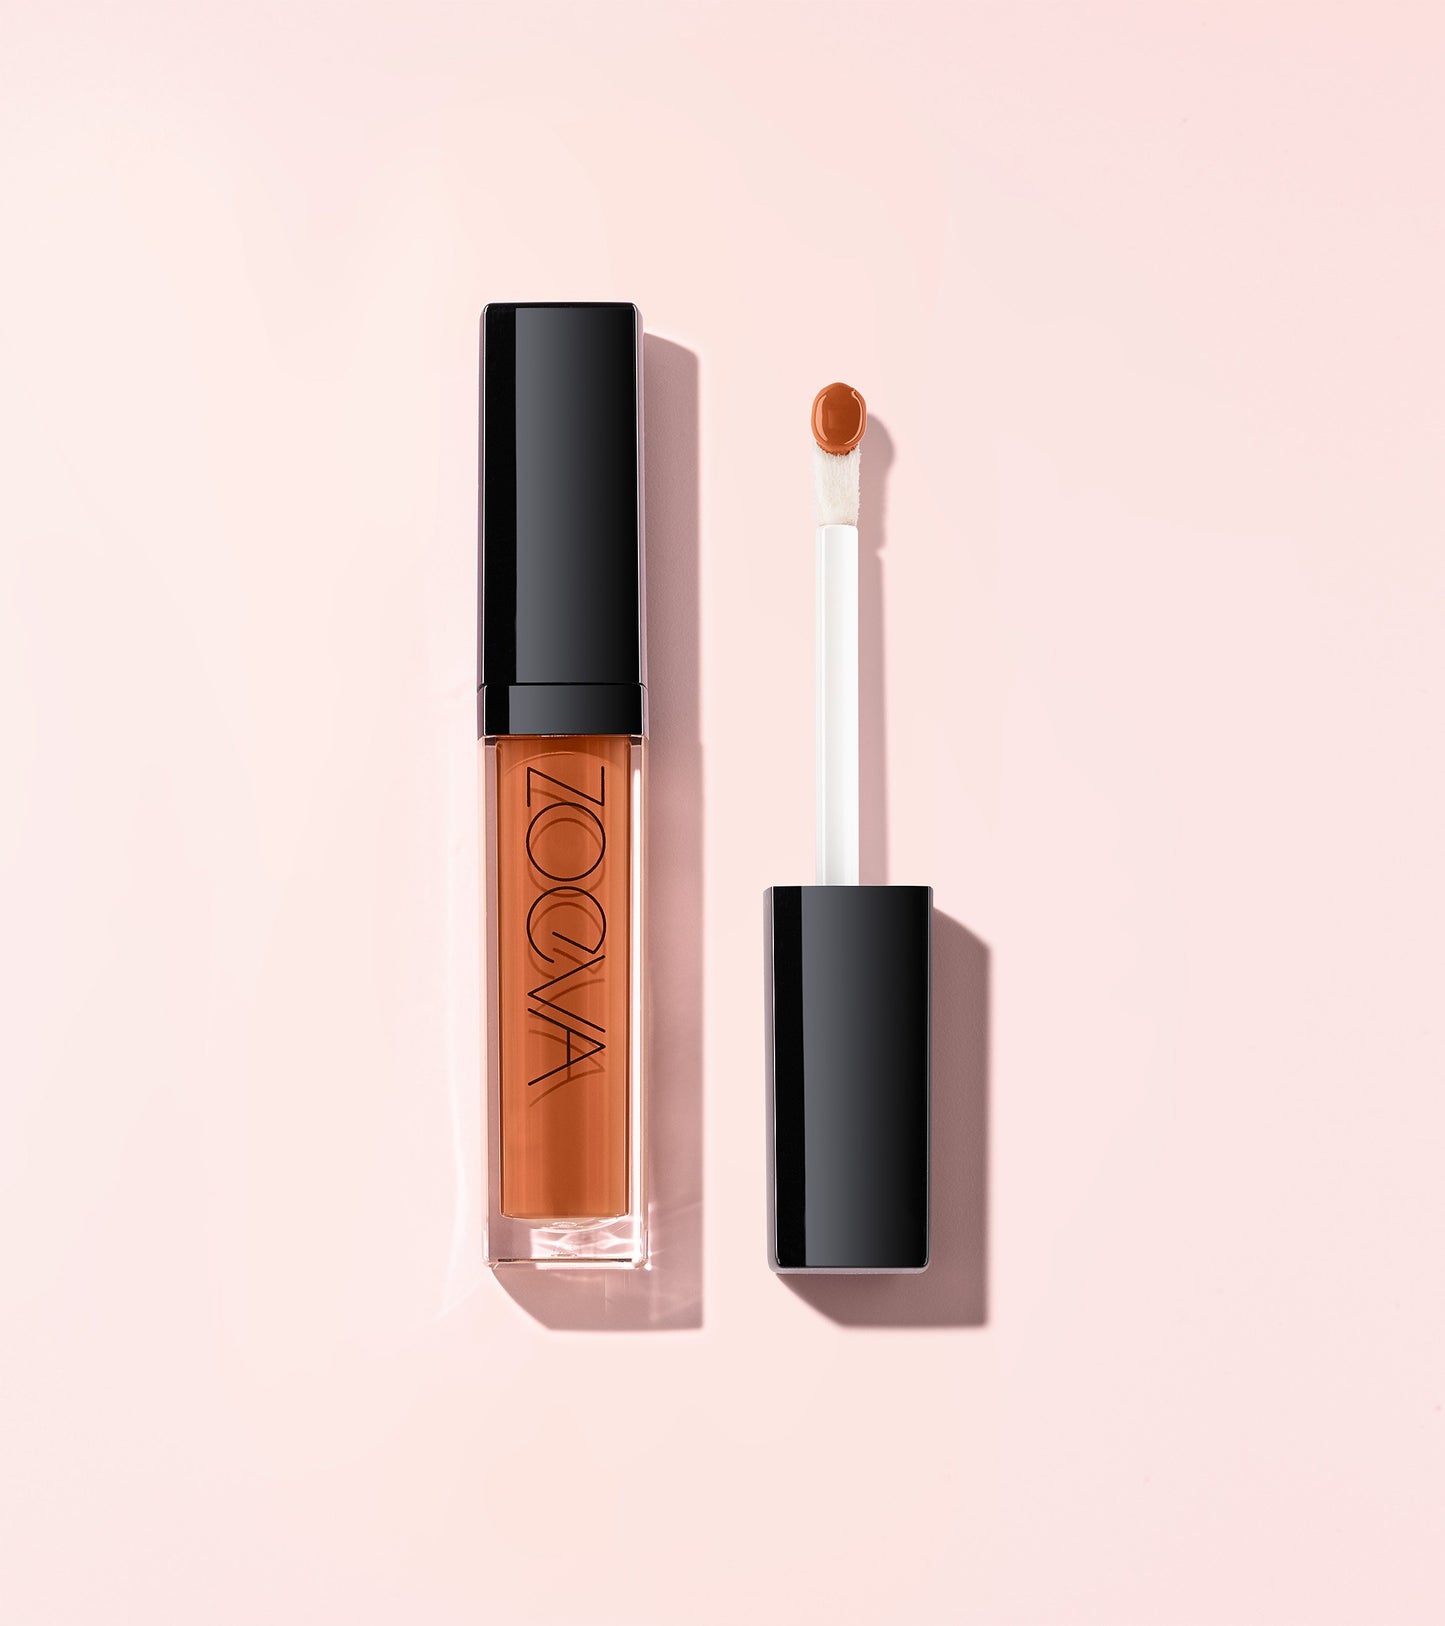 AUTHENTIK SKIN PERFECTOR CONCEALER (300 VALID) Expanded Image 1